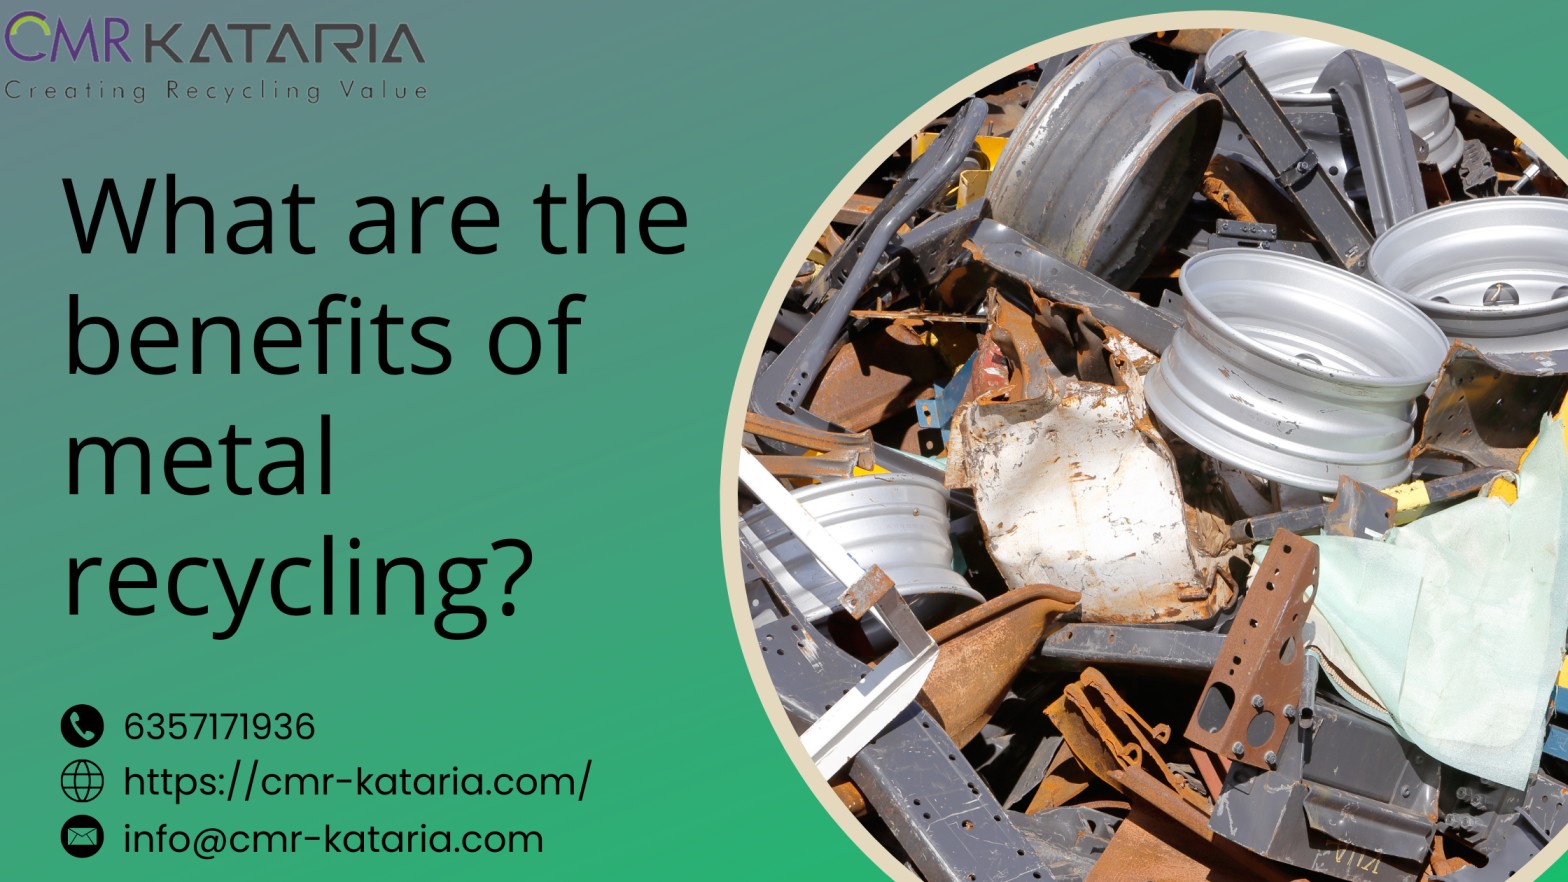 What are the benefits of metal recycling?